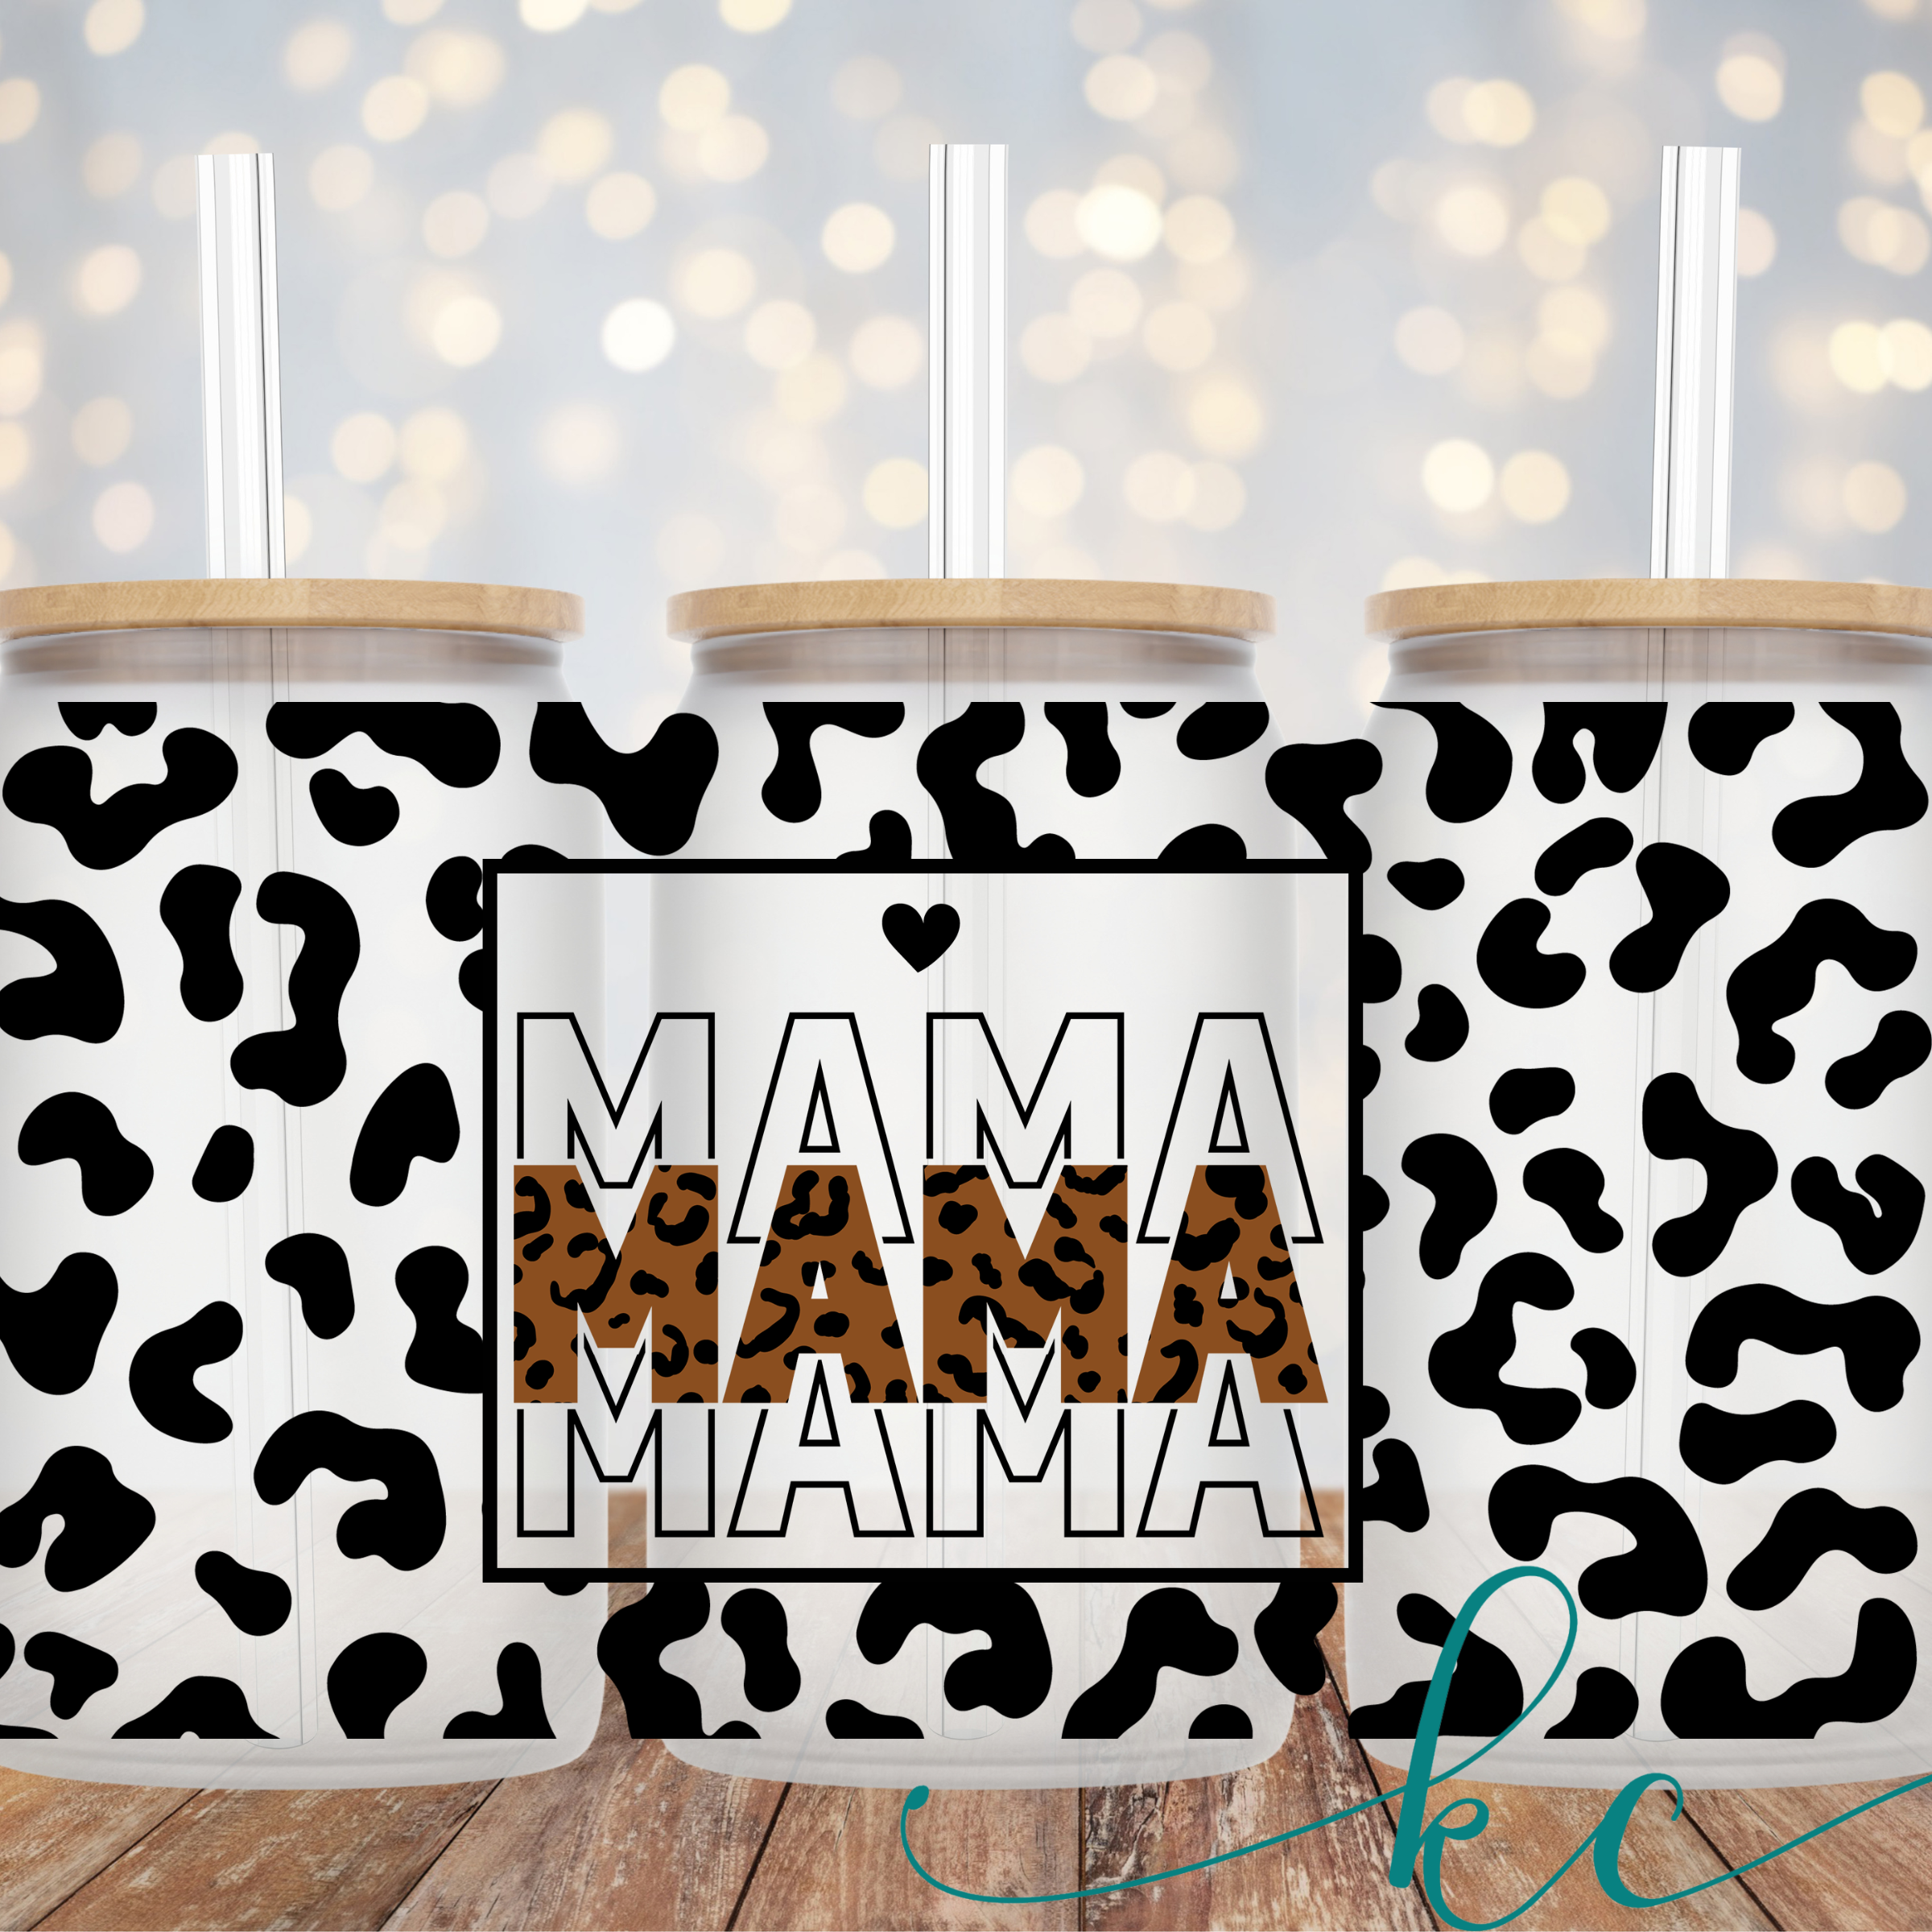 Mama Wrap - Mama Floral Wrap - Ready to Apply Cup Wrap - Cup Wraps -  Waterproof - UV Dtf Cup Wraps - Glass Cup Wraps - 16oz UV DTF